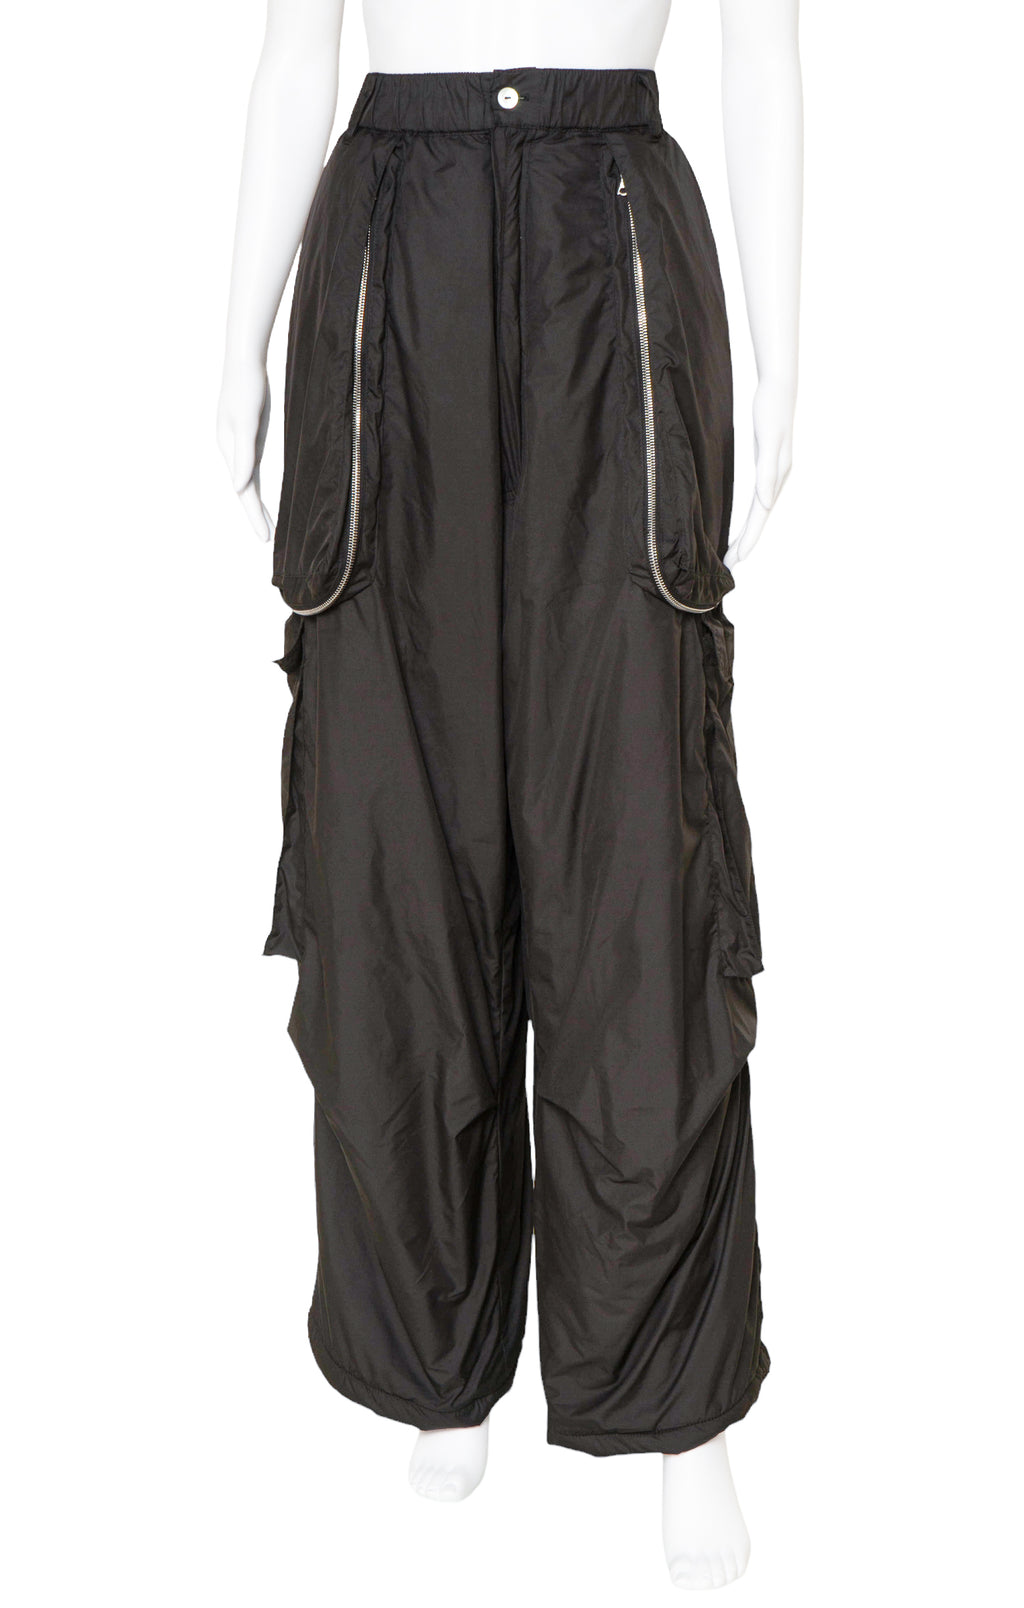 B1ARCHIVE (NEW) with tags Pants Size: Men's M / Fit like Women's L